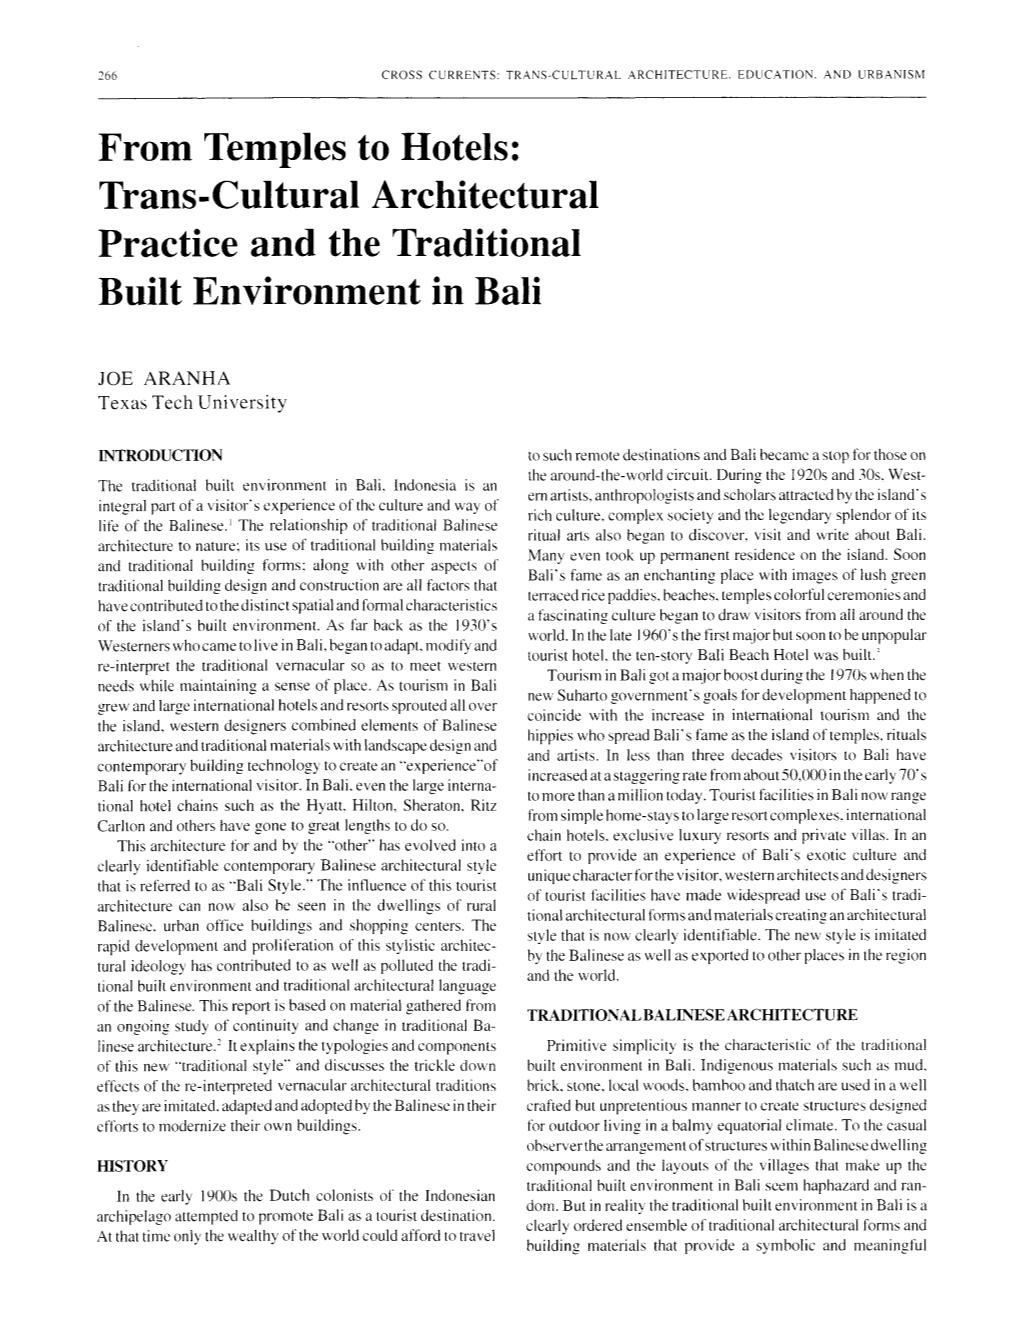 Trans-Cultural Architectural Practice and the Traditional Built Environment in Bali